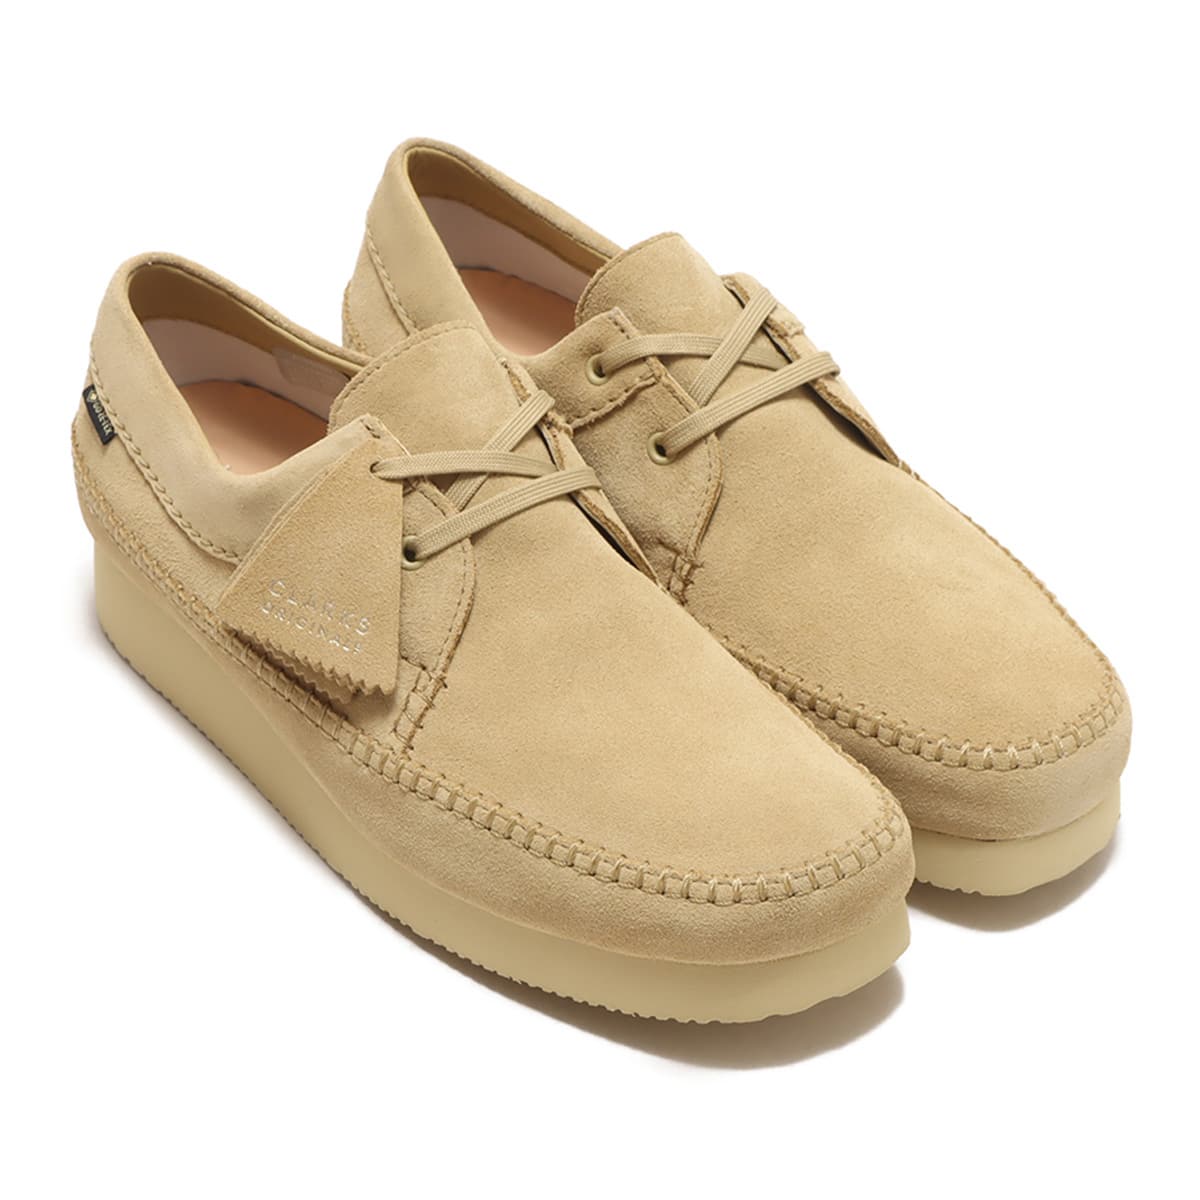 Clarks(クラークス) Weaver Shoes - Maple Suede - スニーカー